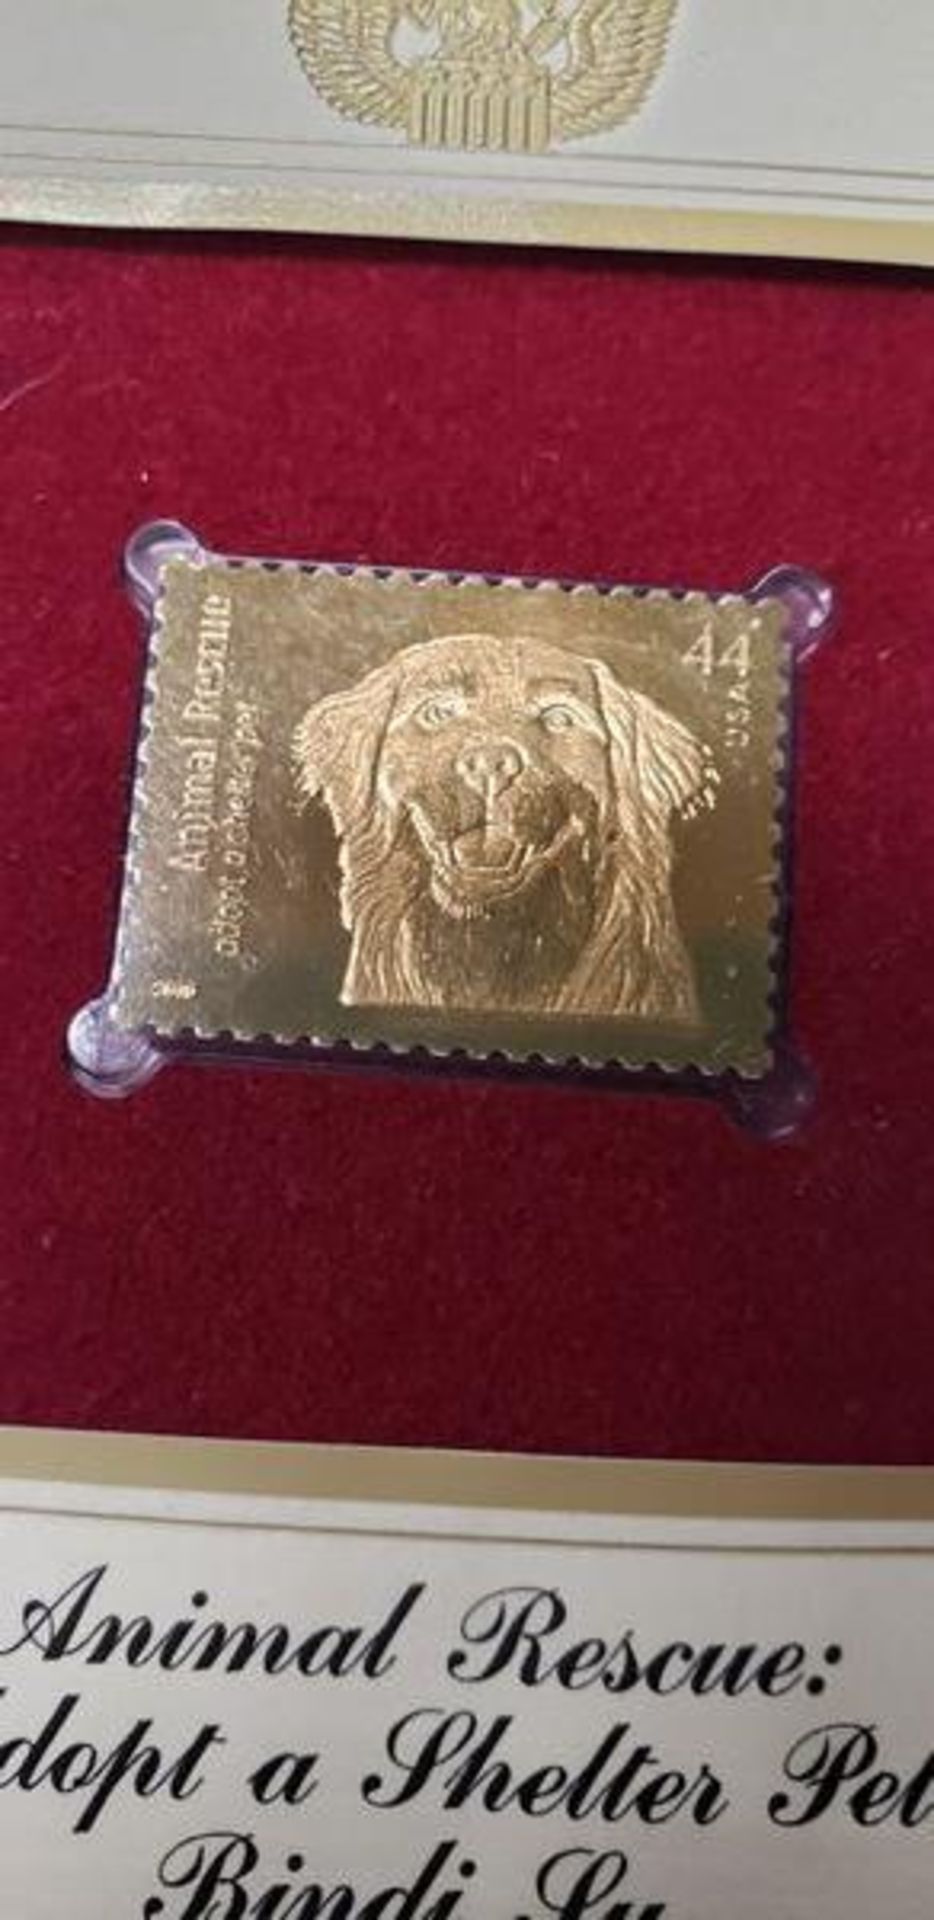 GOLD ANIMAL RESCUE 44 CENT STAMP - Image 2 of 2